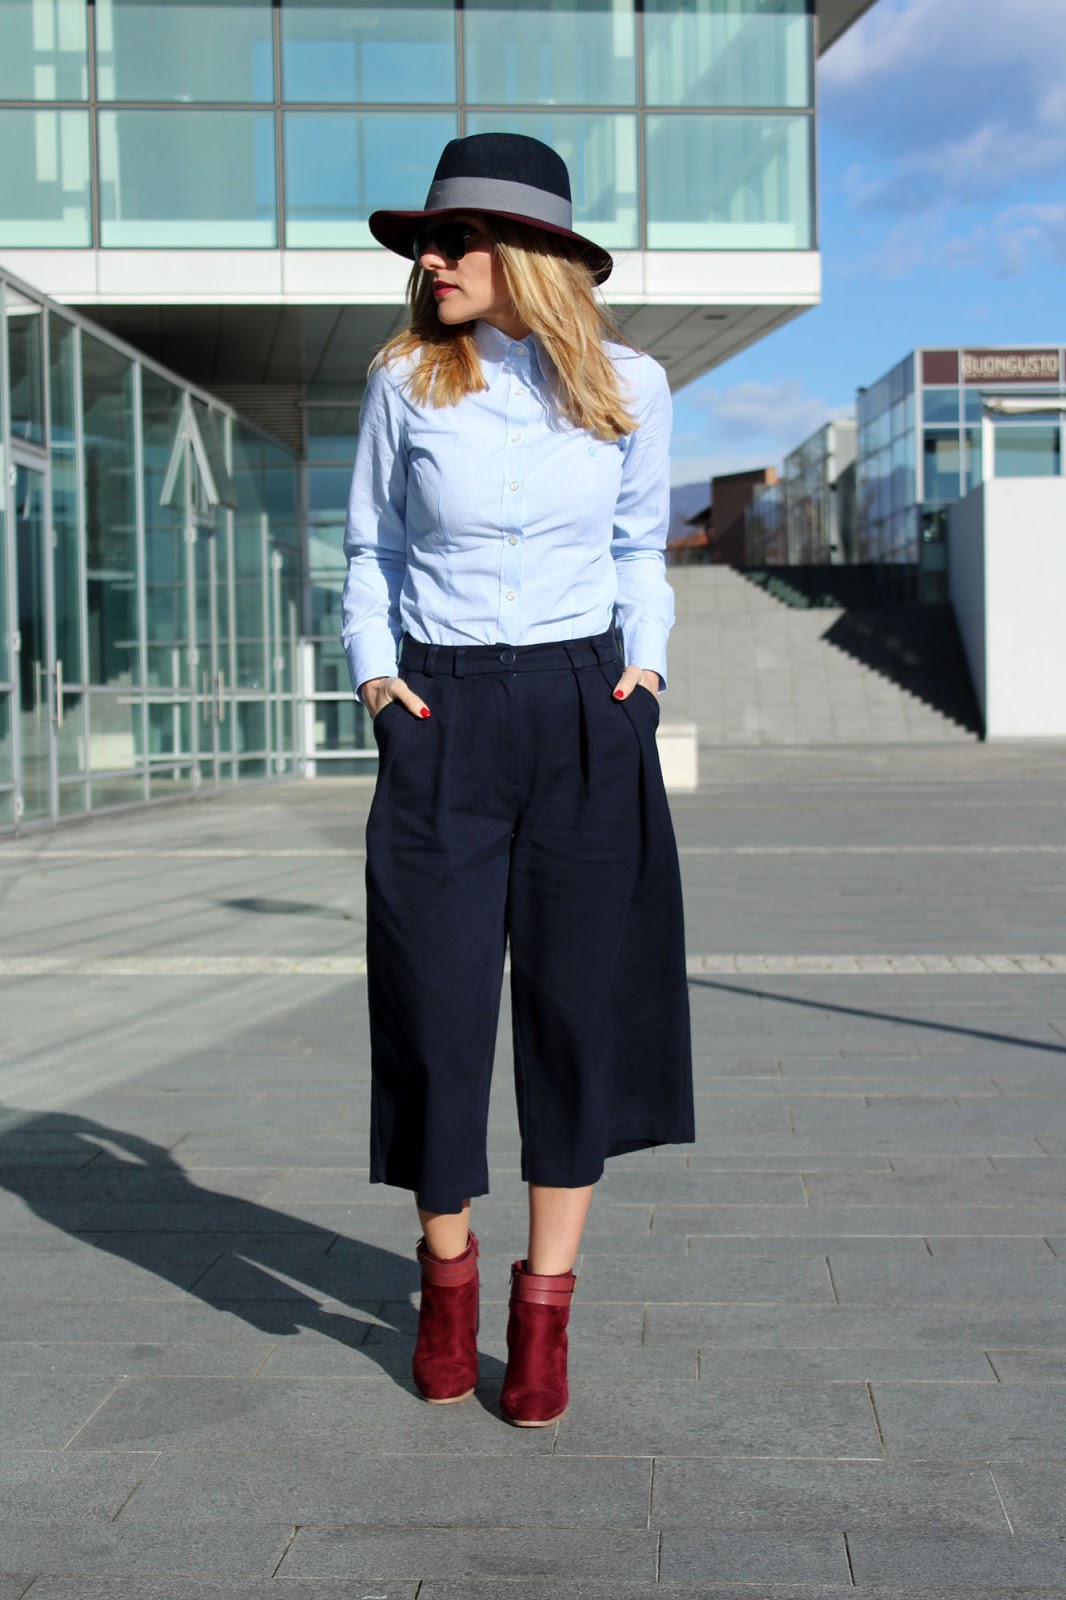 Eniwhere FAshion - Culottes and hat